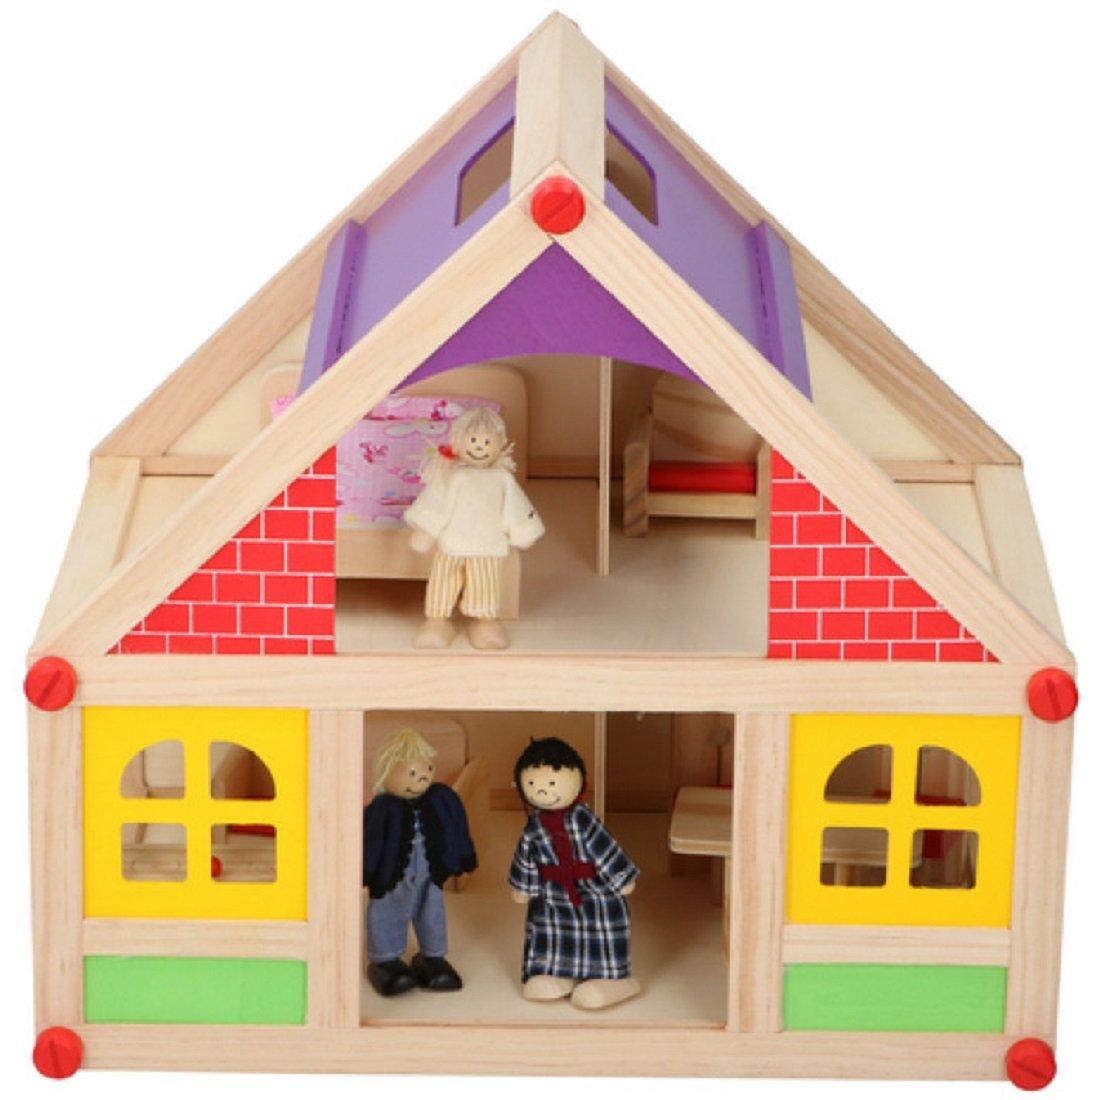 Play House for Children - Wooden Doll House Perfect for Indoor and Outdoor Play